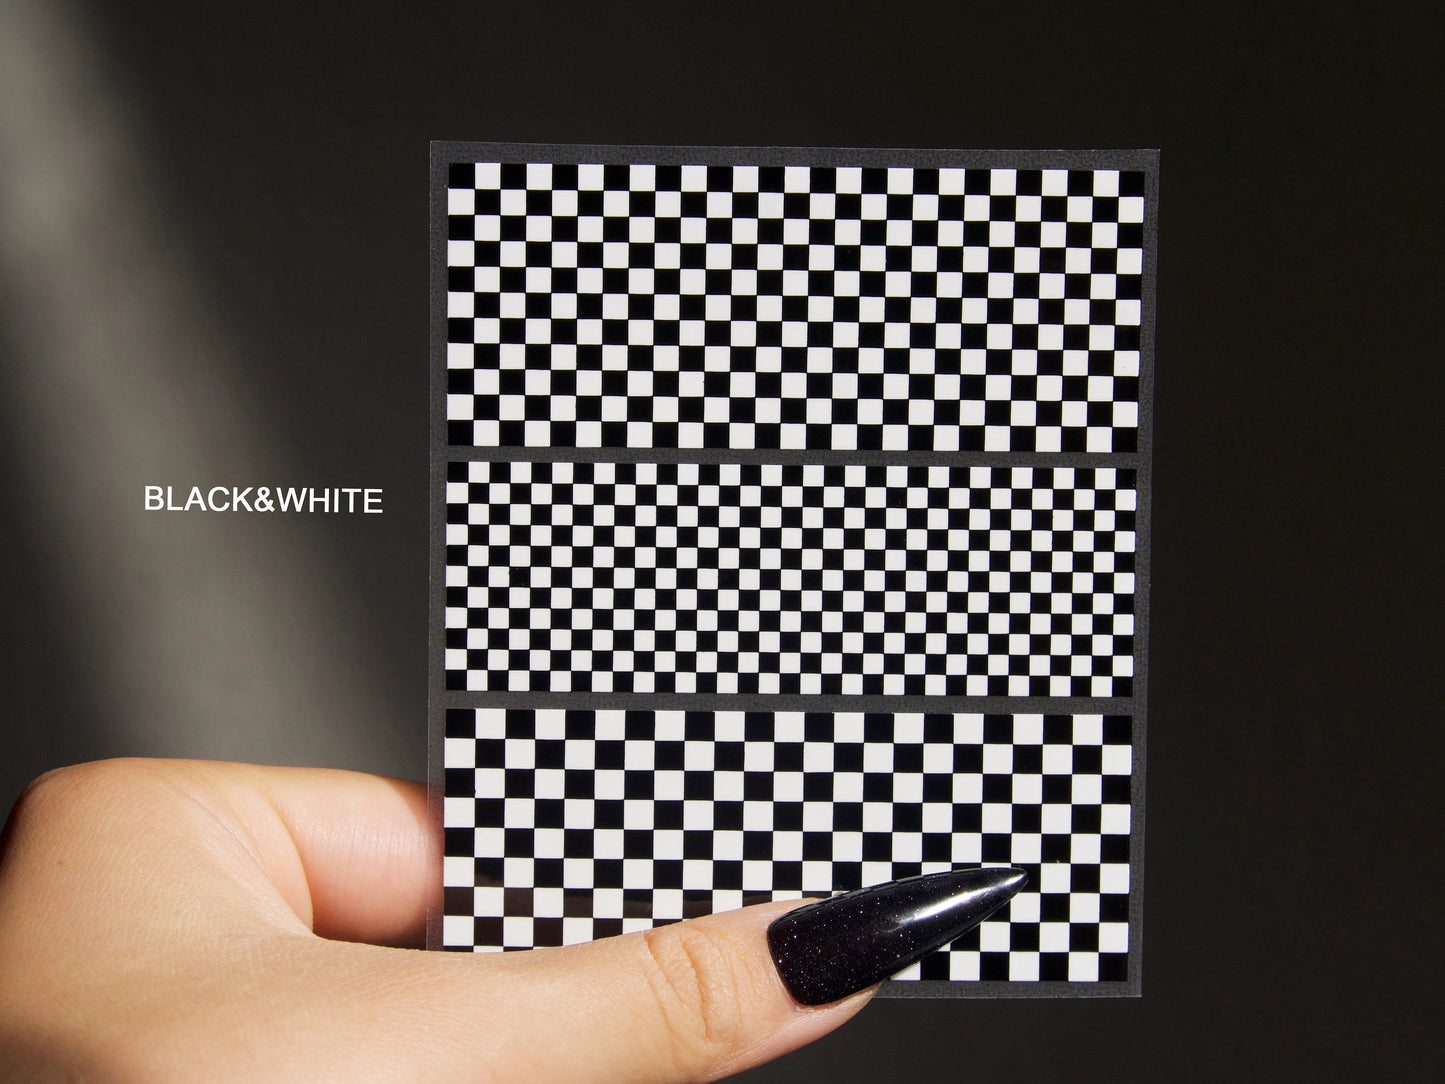 Black and White Checkered Plaid Pattern Nail Art Sticker/ Square Grids Peel Off Tips Stickers/ Black Clear Check Nail Decal Supply